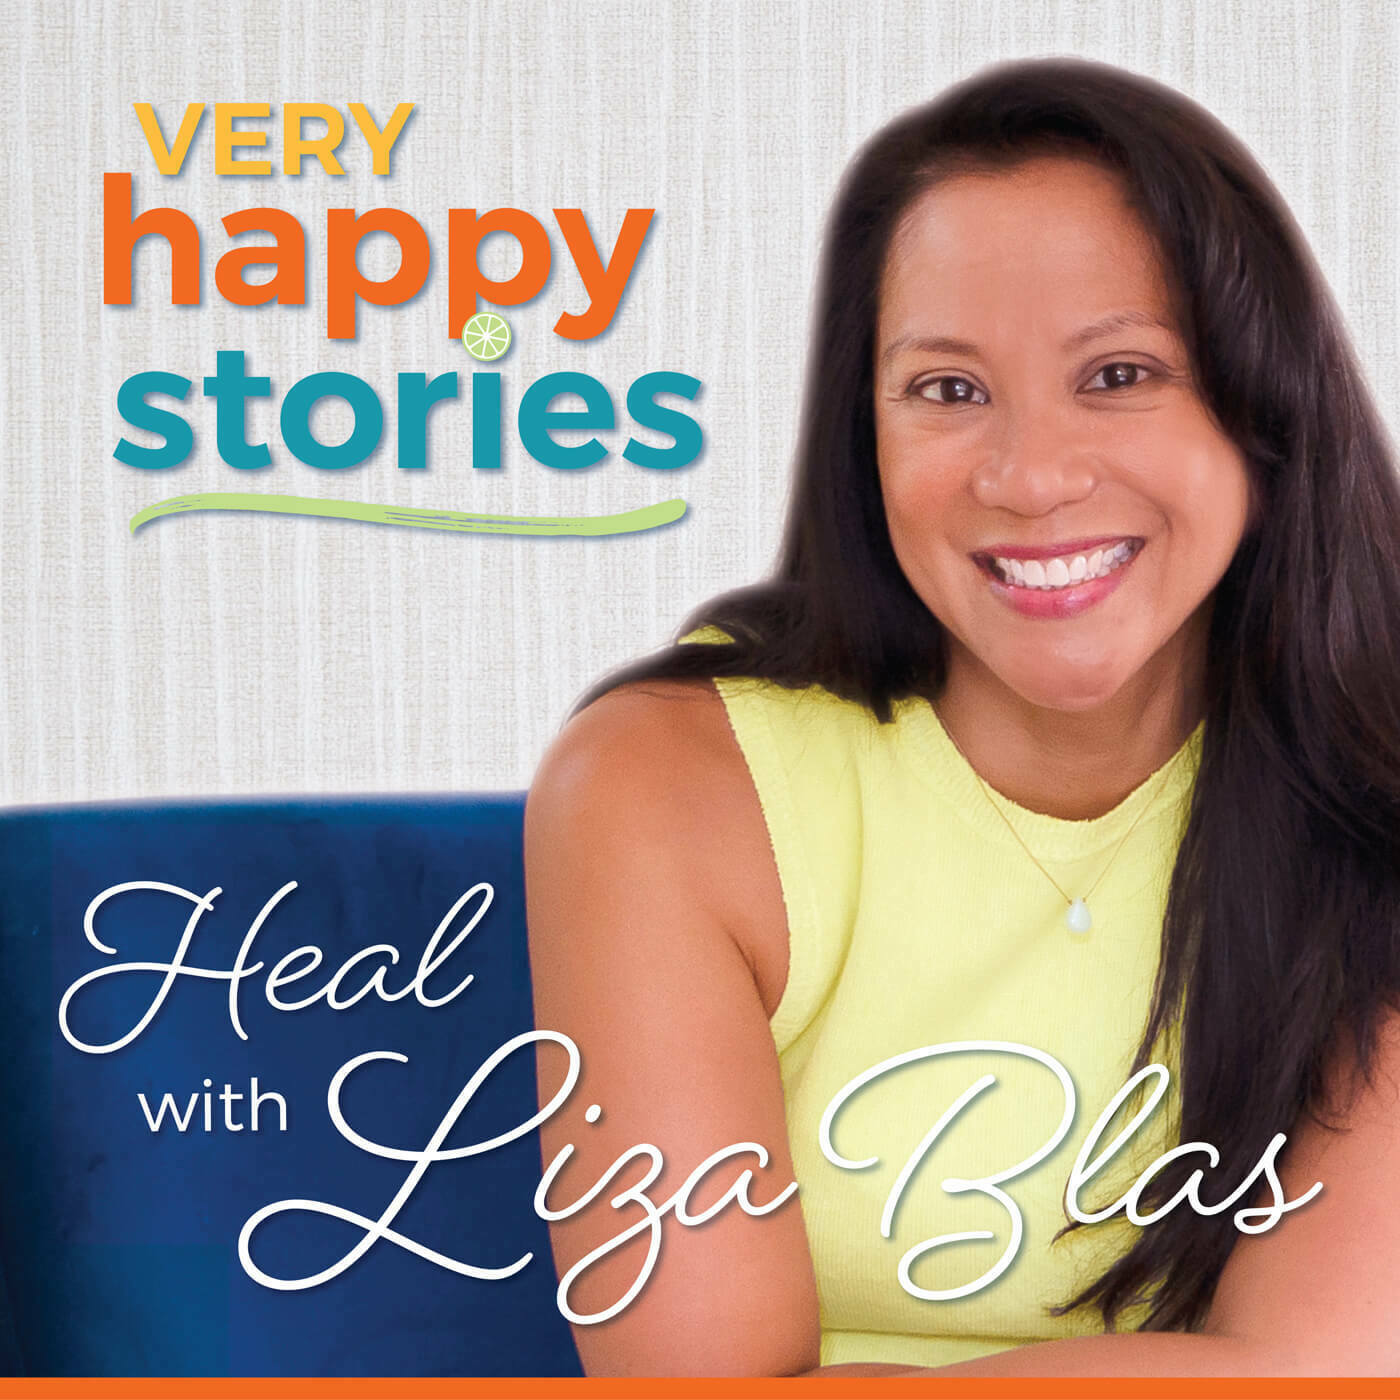 168. Hue Virtual Chat with Tracy Koga: Sylvia Marusyk, Sonia Funk : Coaching, Making Our Lives Better?